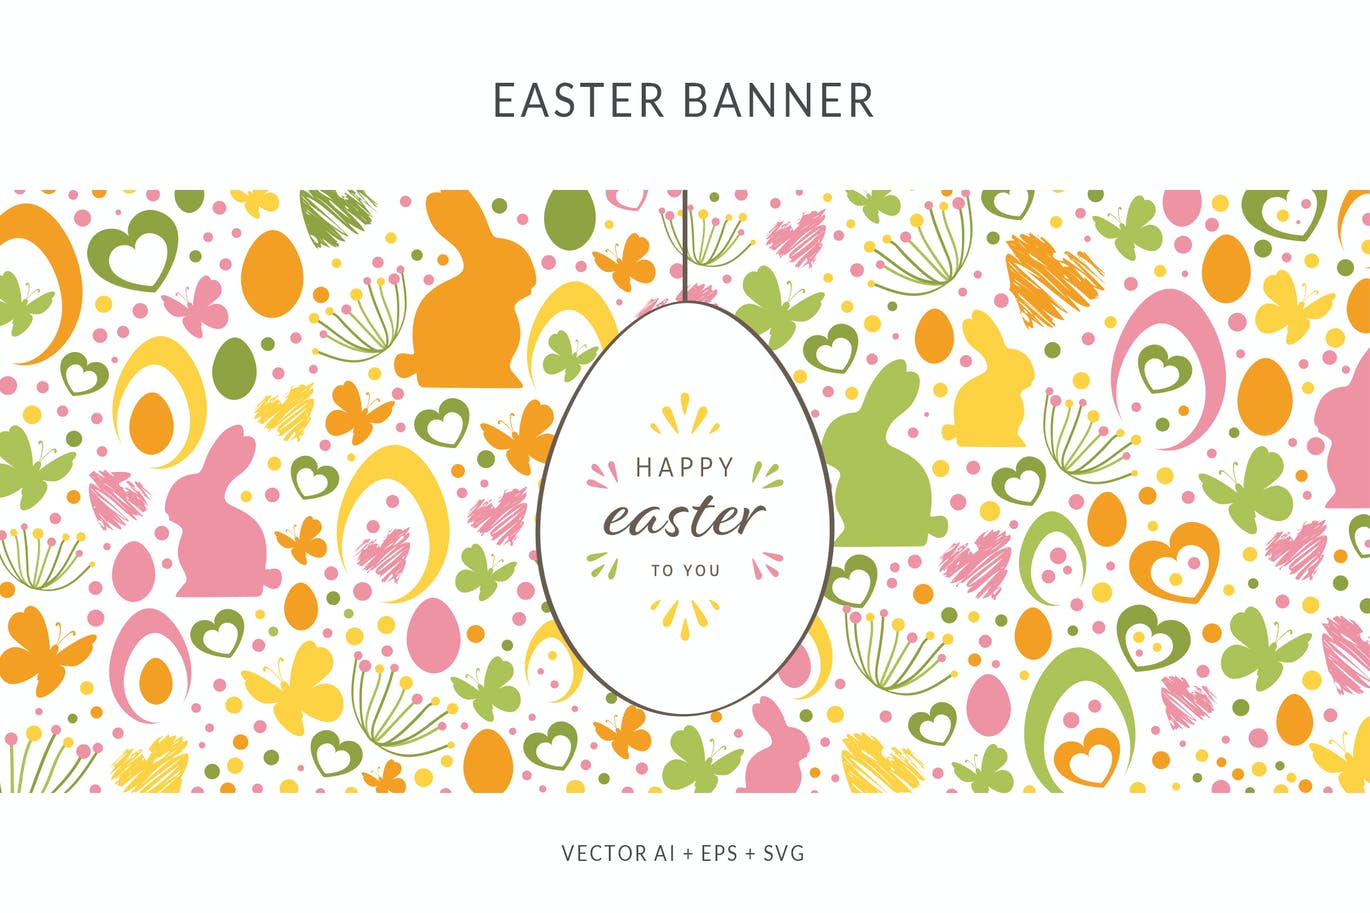 Easter Banner with different Easter Elements